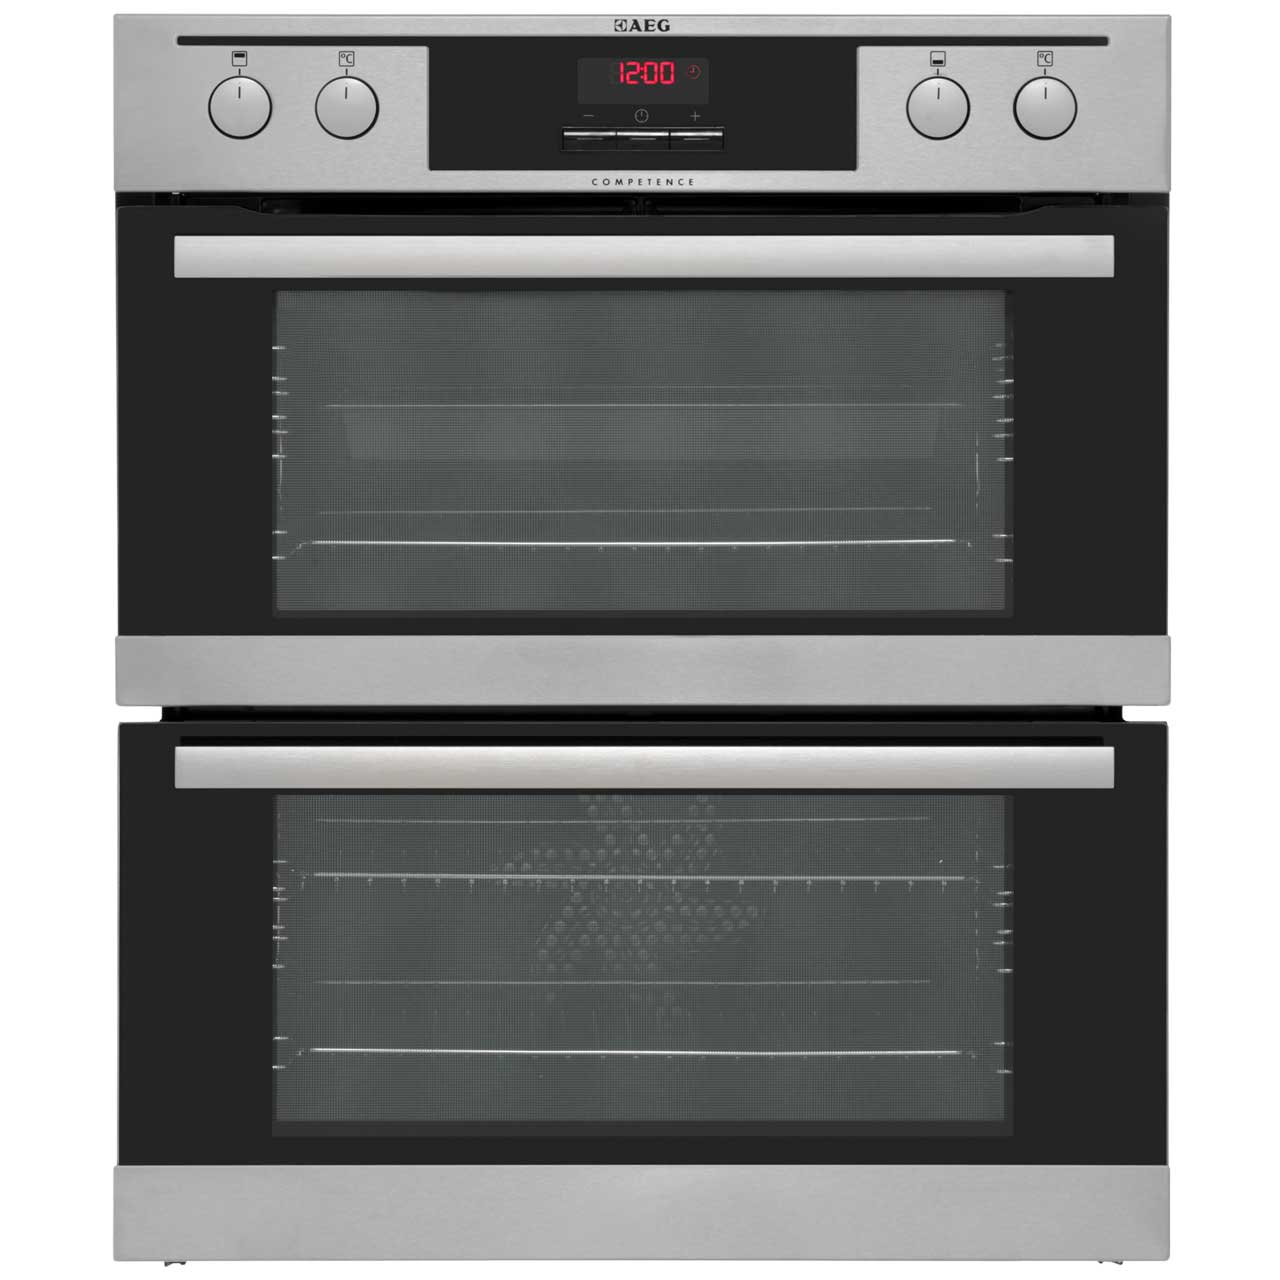 AEG Competence NC4013021M Built Under Double Oven in Stainless Steel